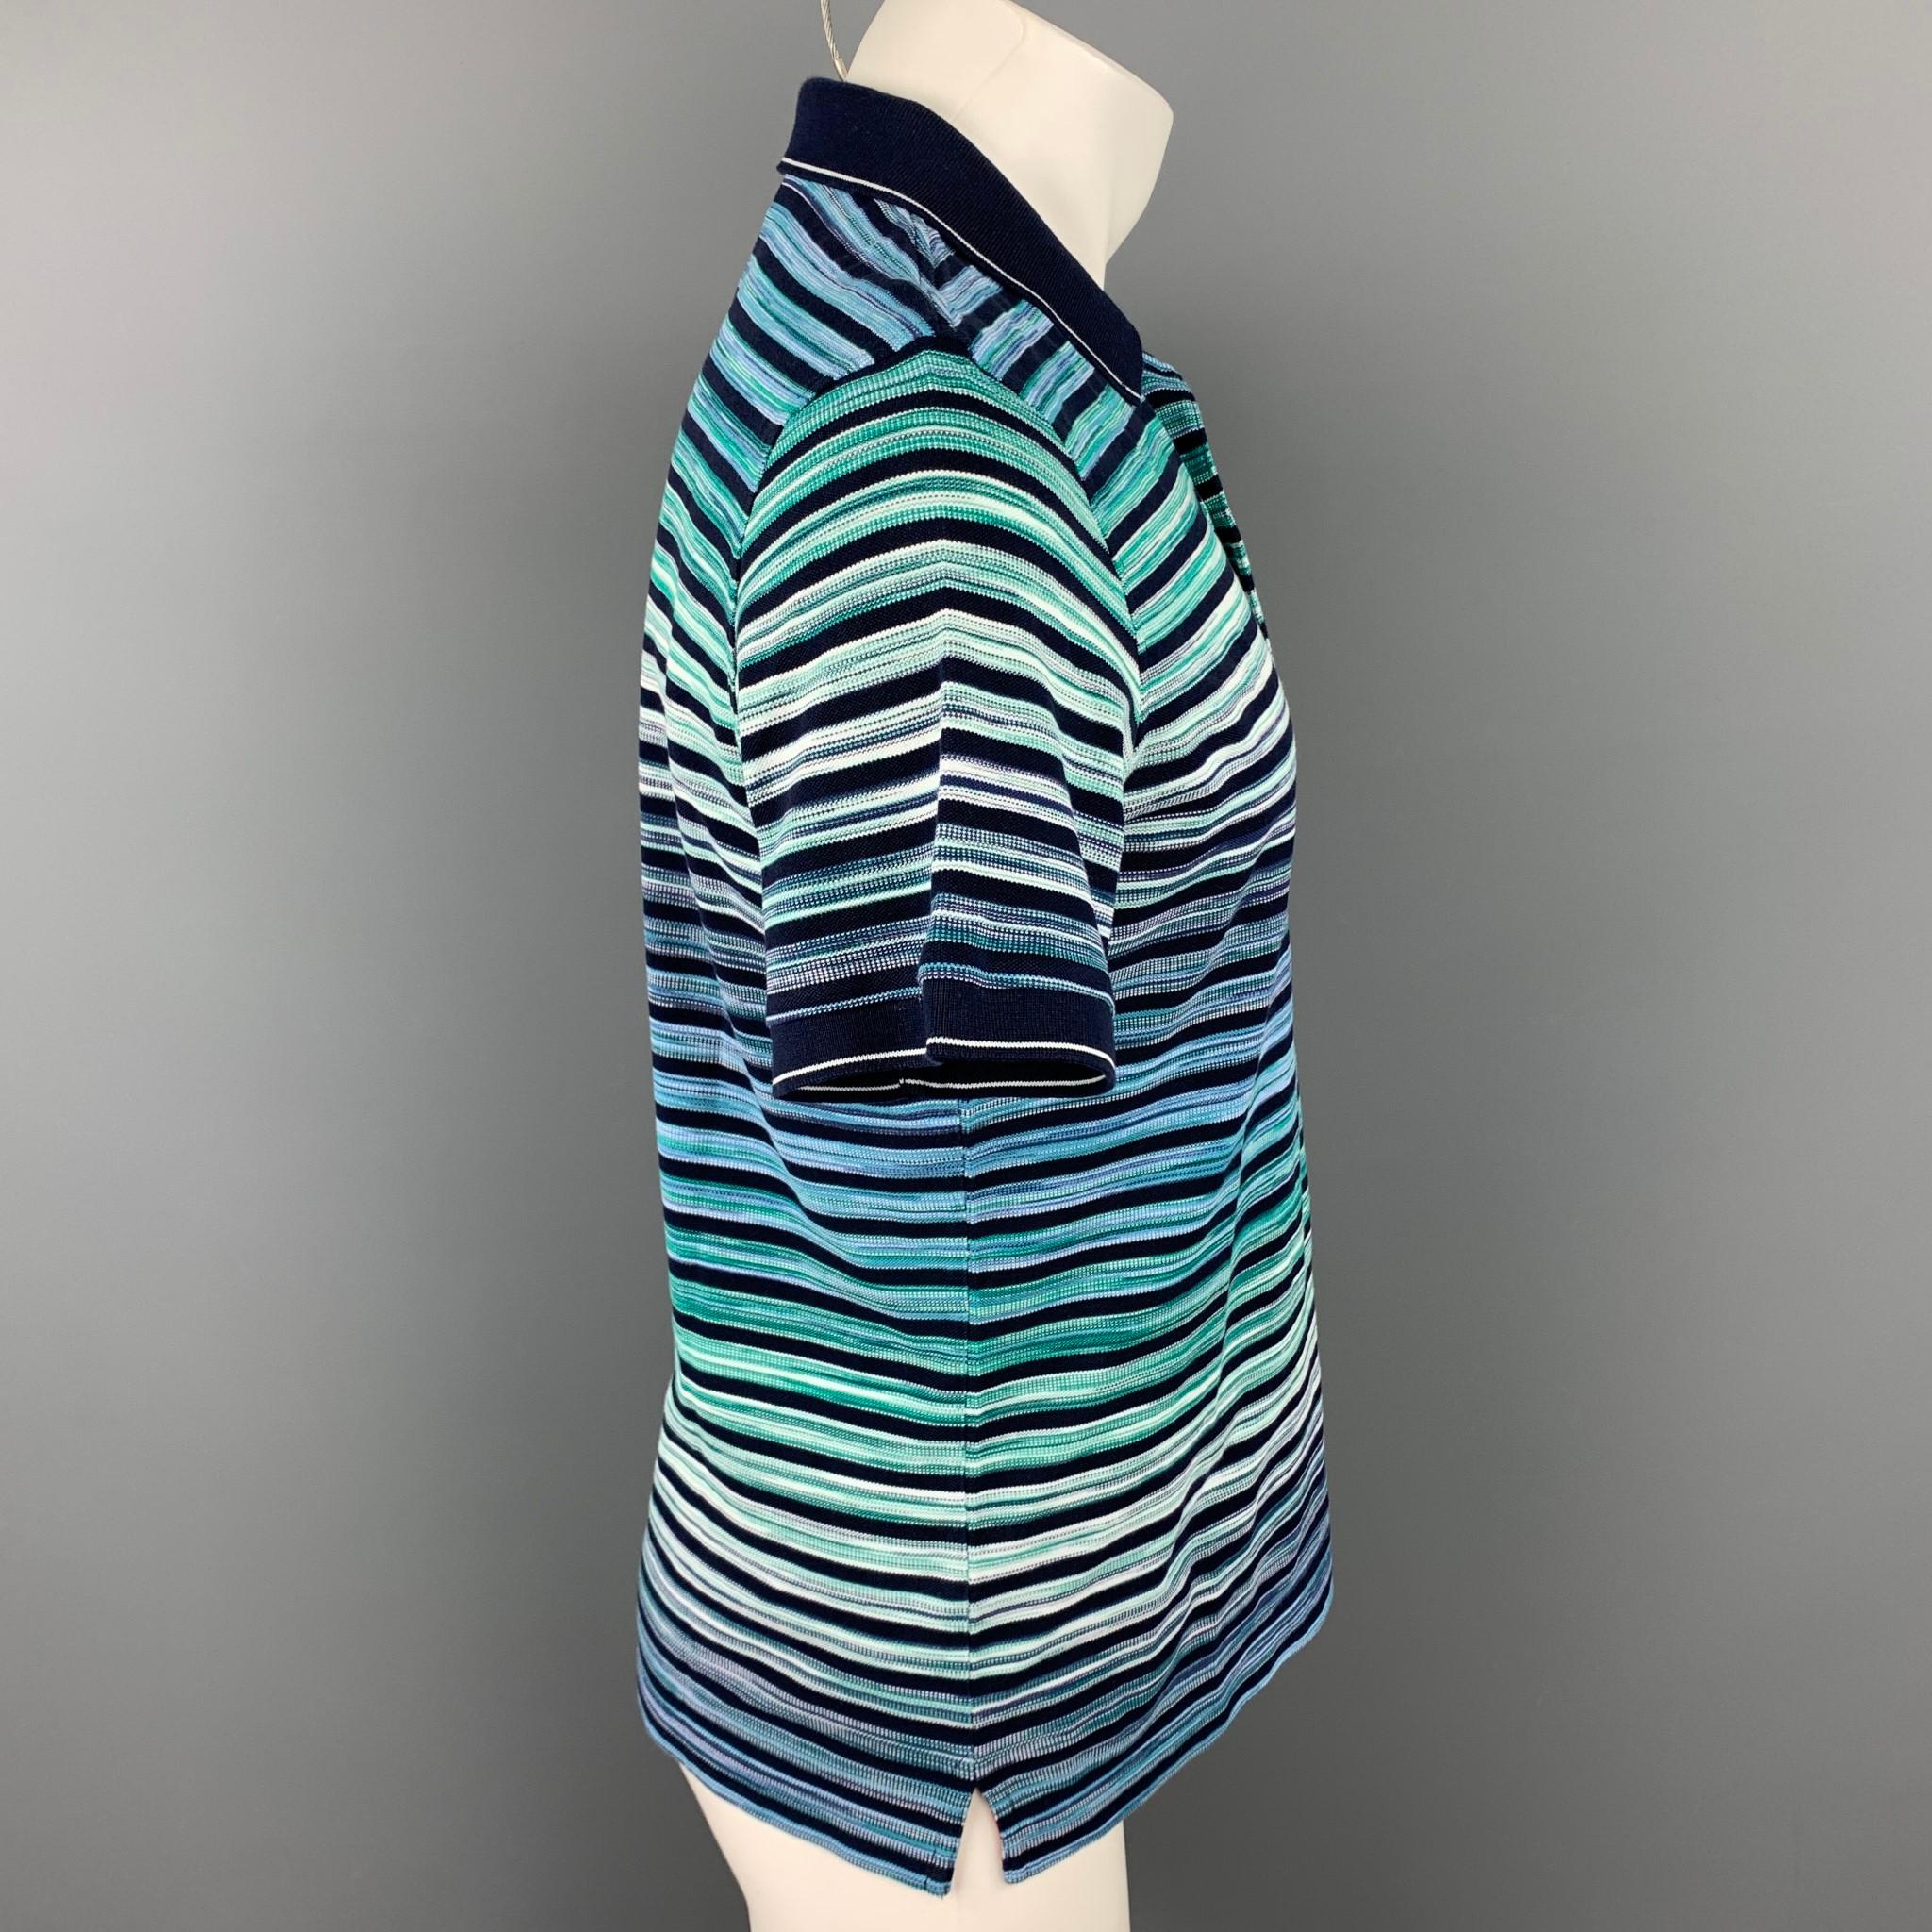 MISSONI polo comes in a black & blue stripe cotton featuring a spread collar and a buttoned closure. Made in Italy.

Very Good Pre-Owned Condition.
Marked: M
Original Retail Price: $426.00

Measurements:

Shoulder: 18 in.
Chest: 41 in.
Sleeve: 10